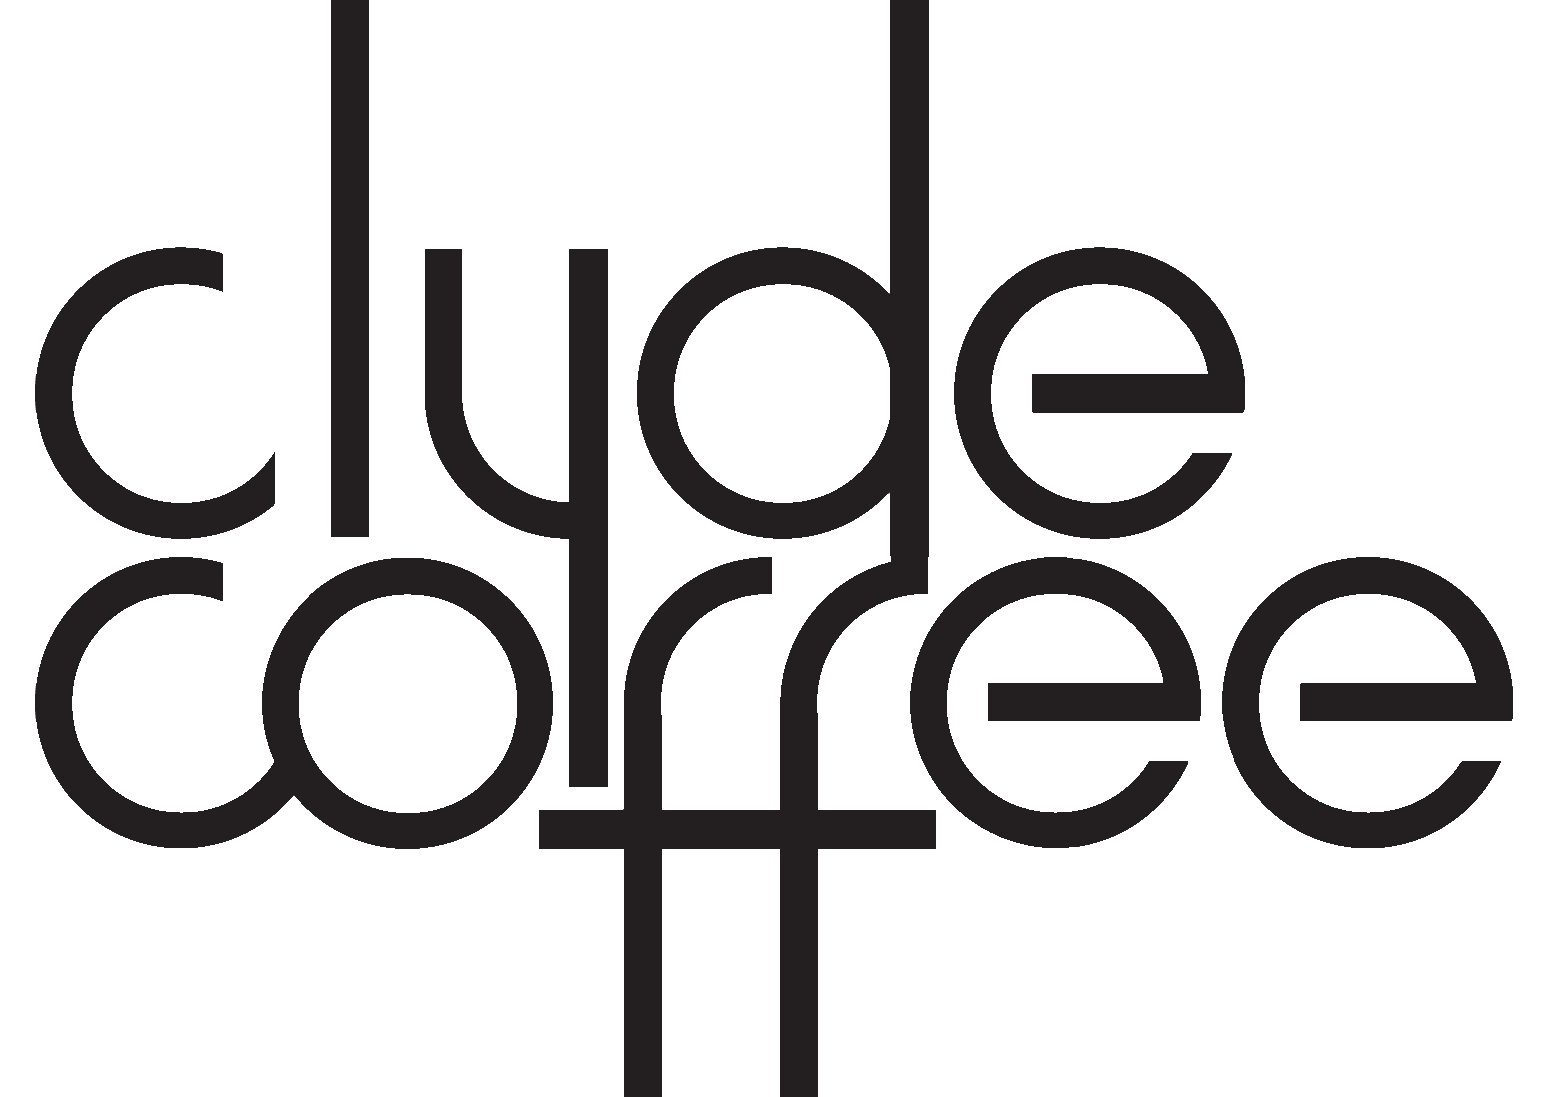 Clyde Coffee